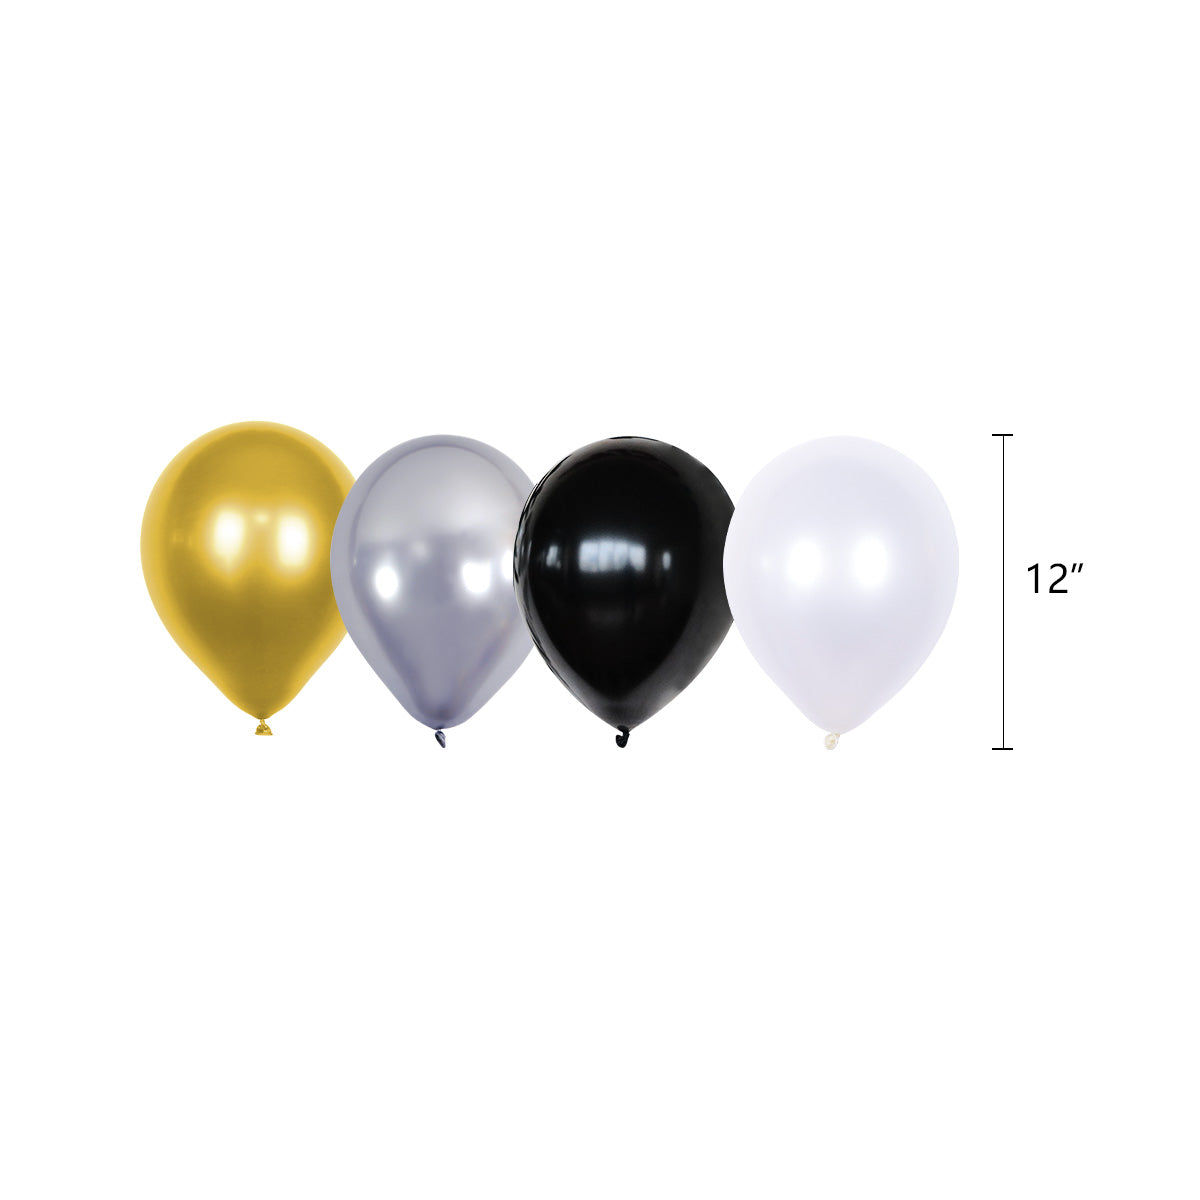 Black and Gold Party Decorations – Product Testing Group